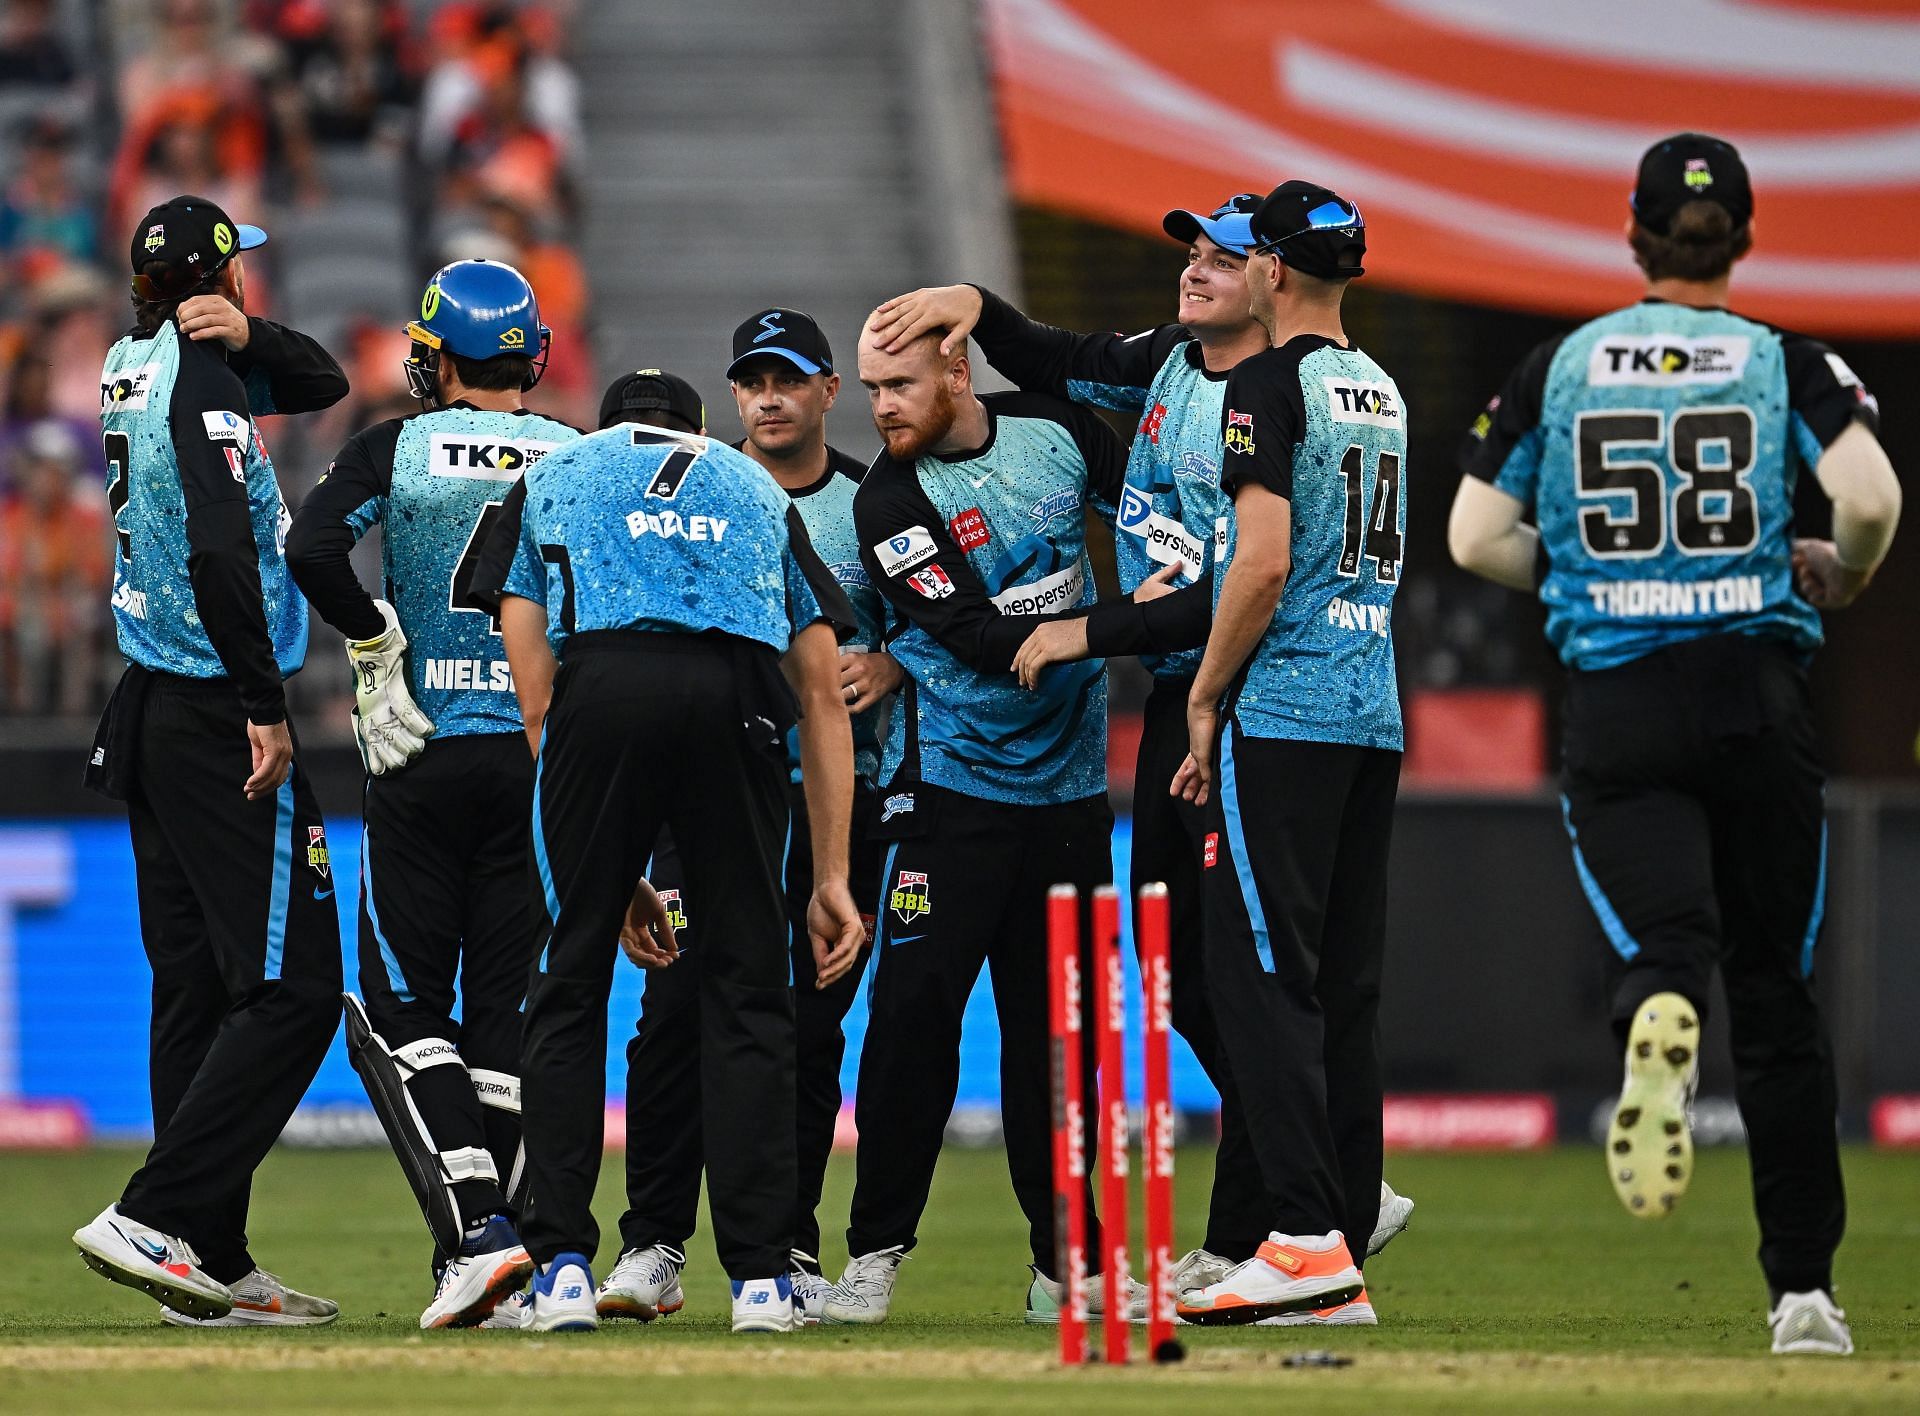 BBL - The Knockout: Perth Scorchers v Adelaide Strikers